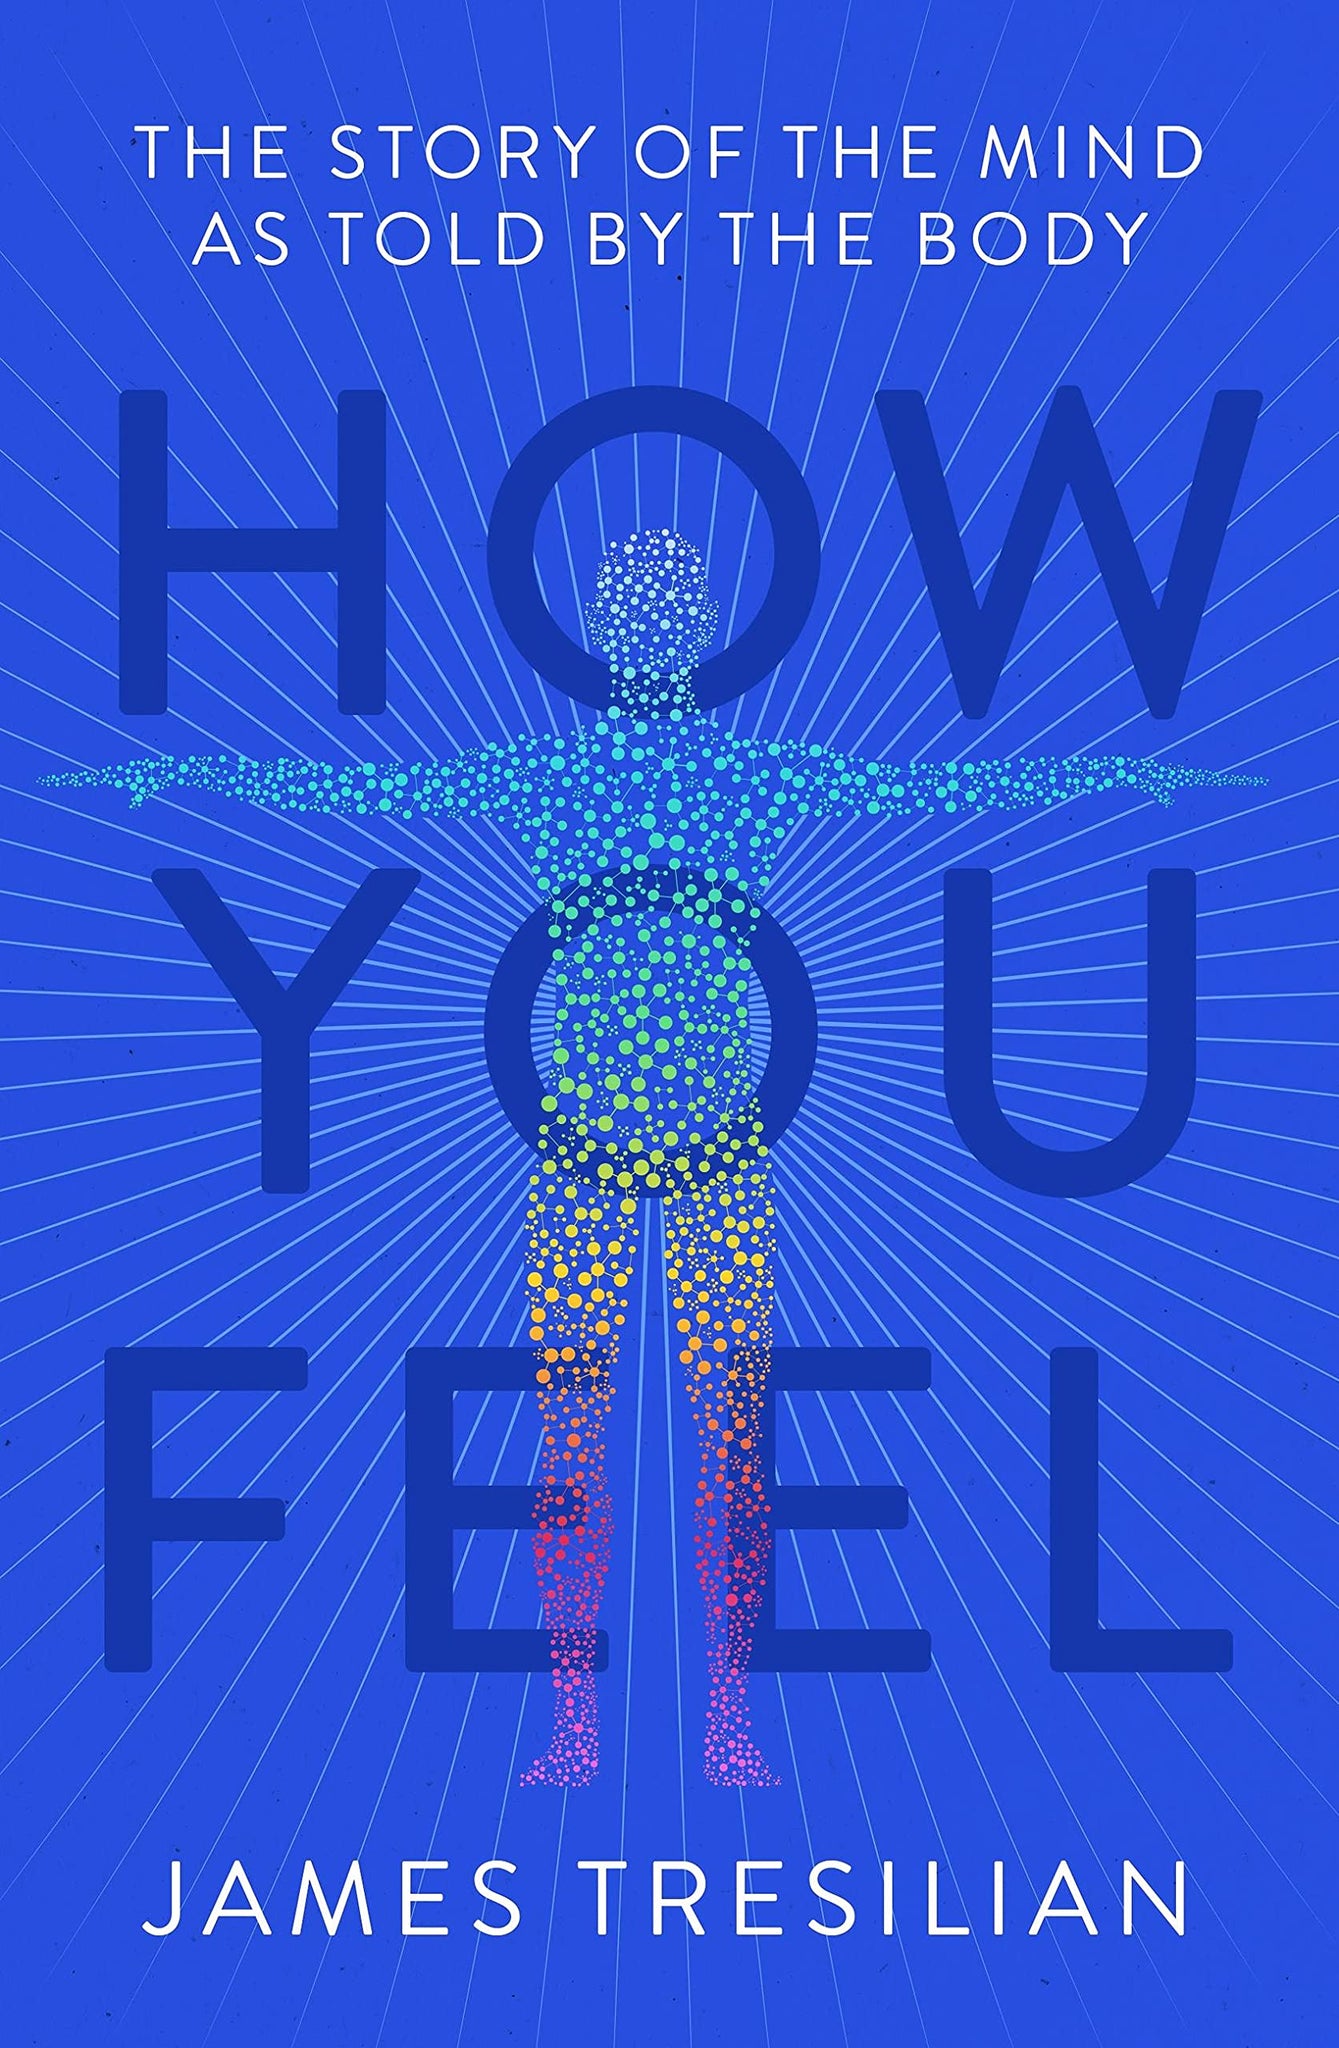 How You Feel: The Story of the Mind as Told by the Body by James Tresilian